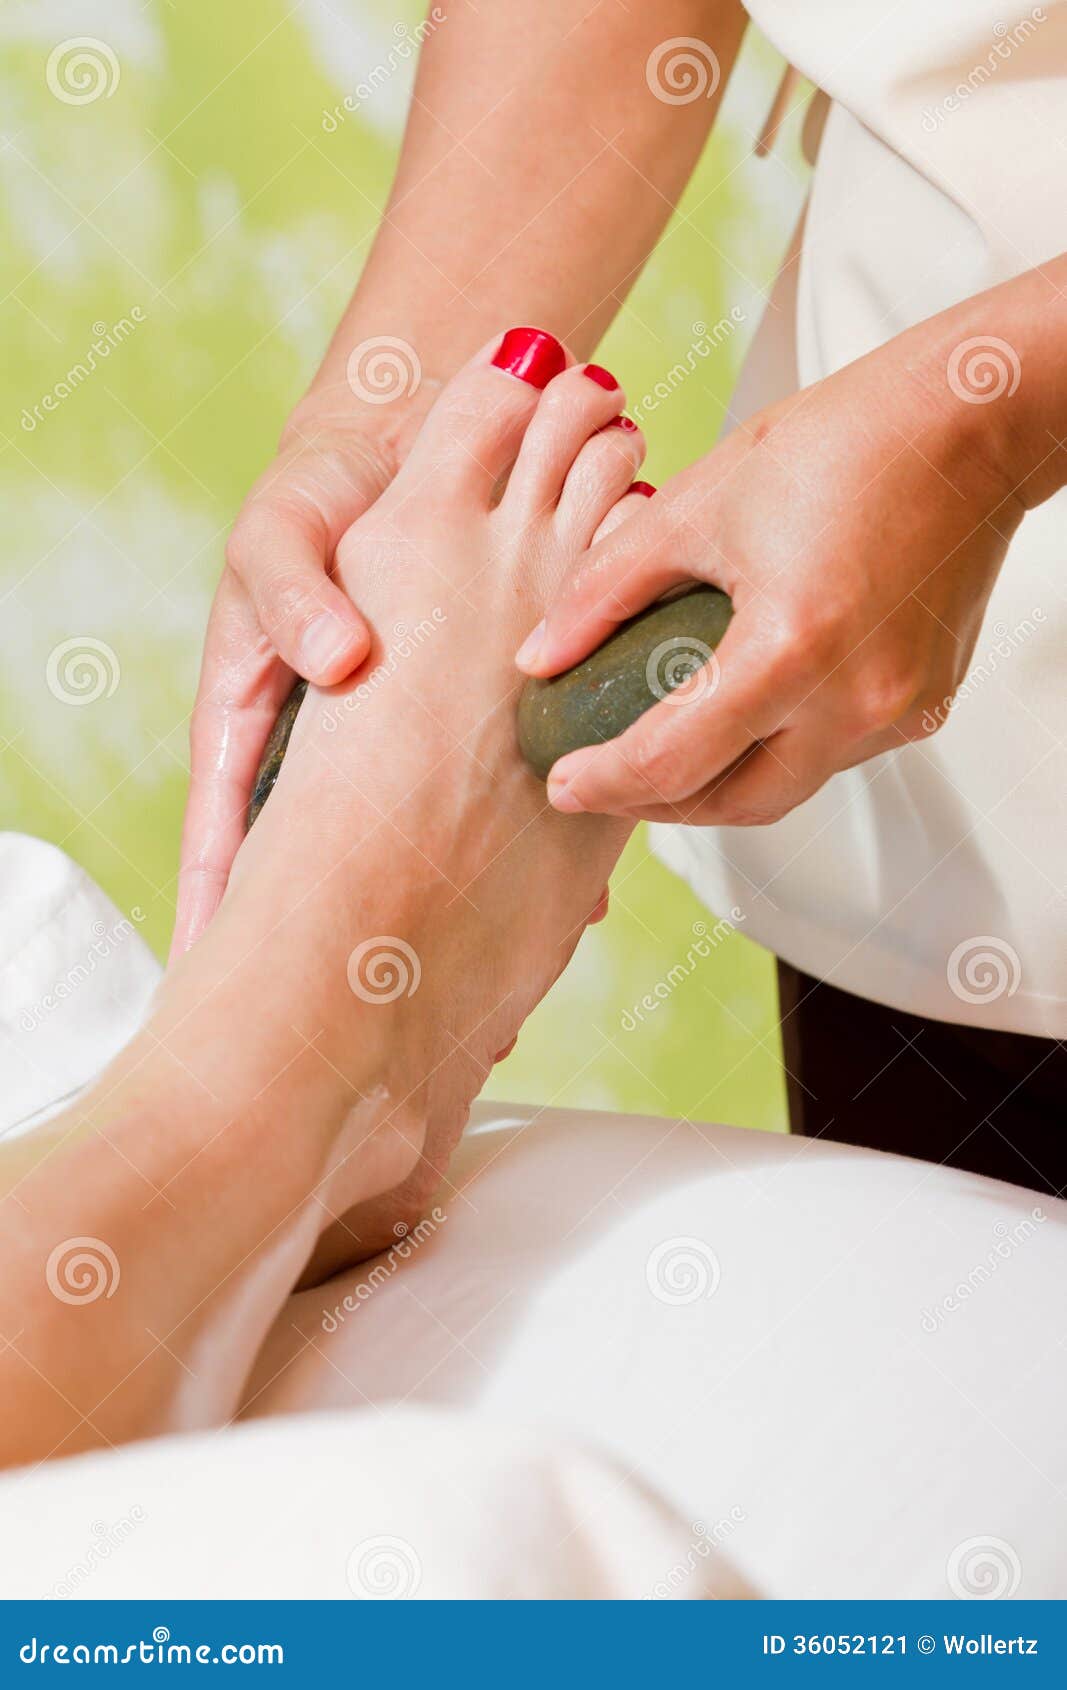 Hot Stone Massage Stock Image Image Of Health Relief